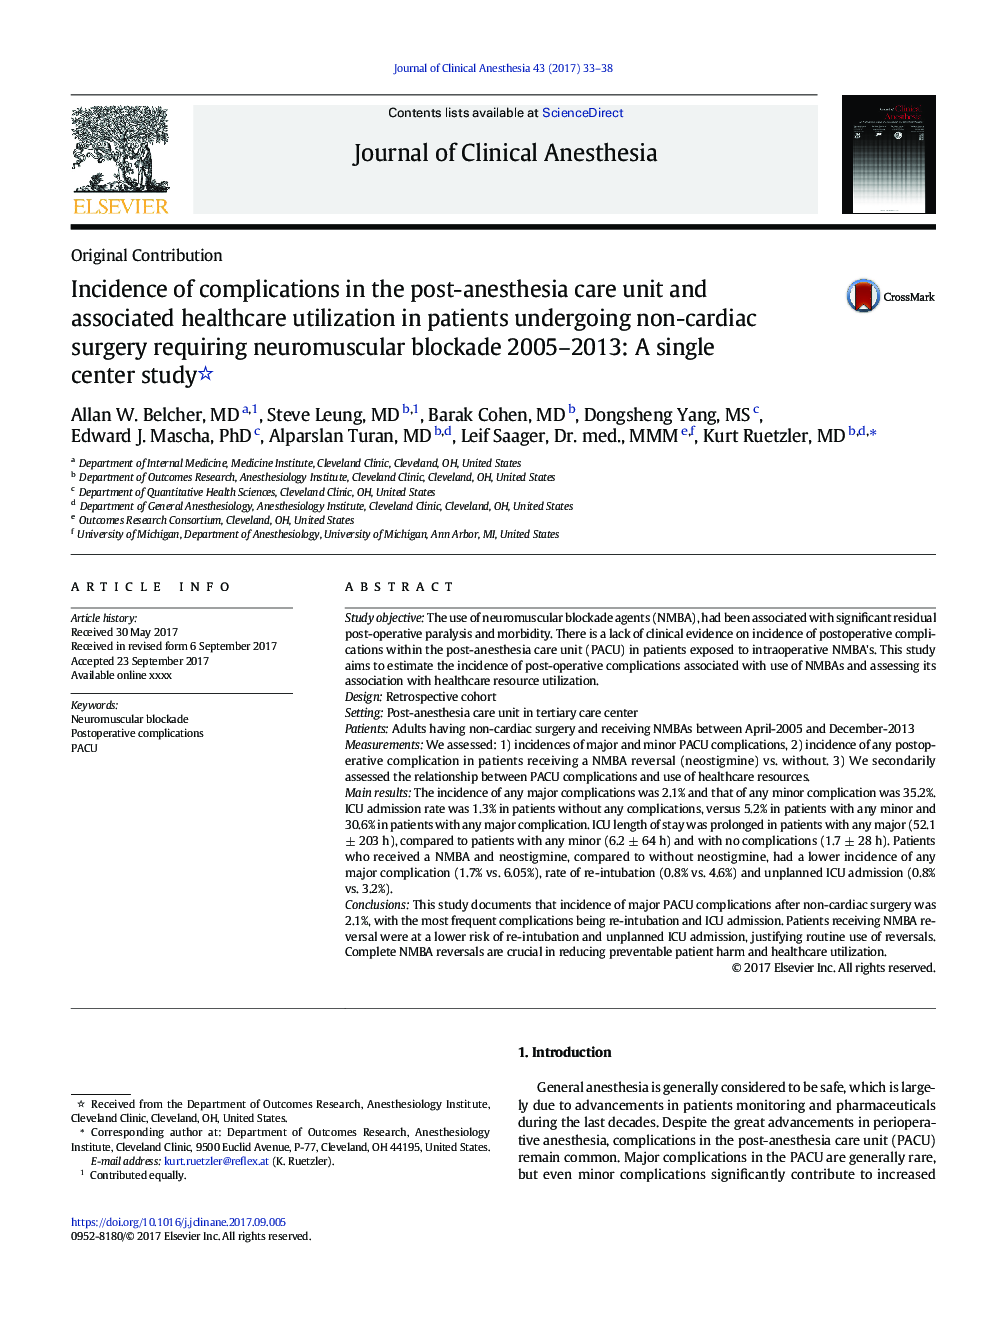 Incidence of complications in the post-anesthesia care unit and associated healthcare utilization in patients undergoing non-cardiac surgery requiring neuromuscular blockade 2005-2013: A single center study